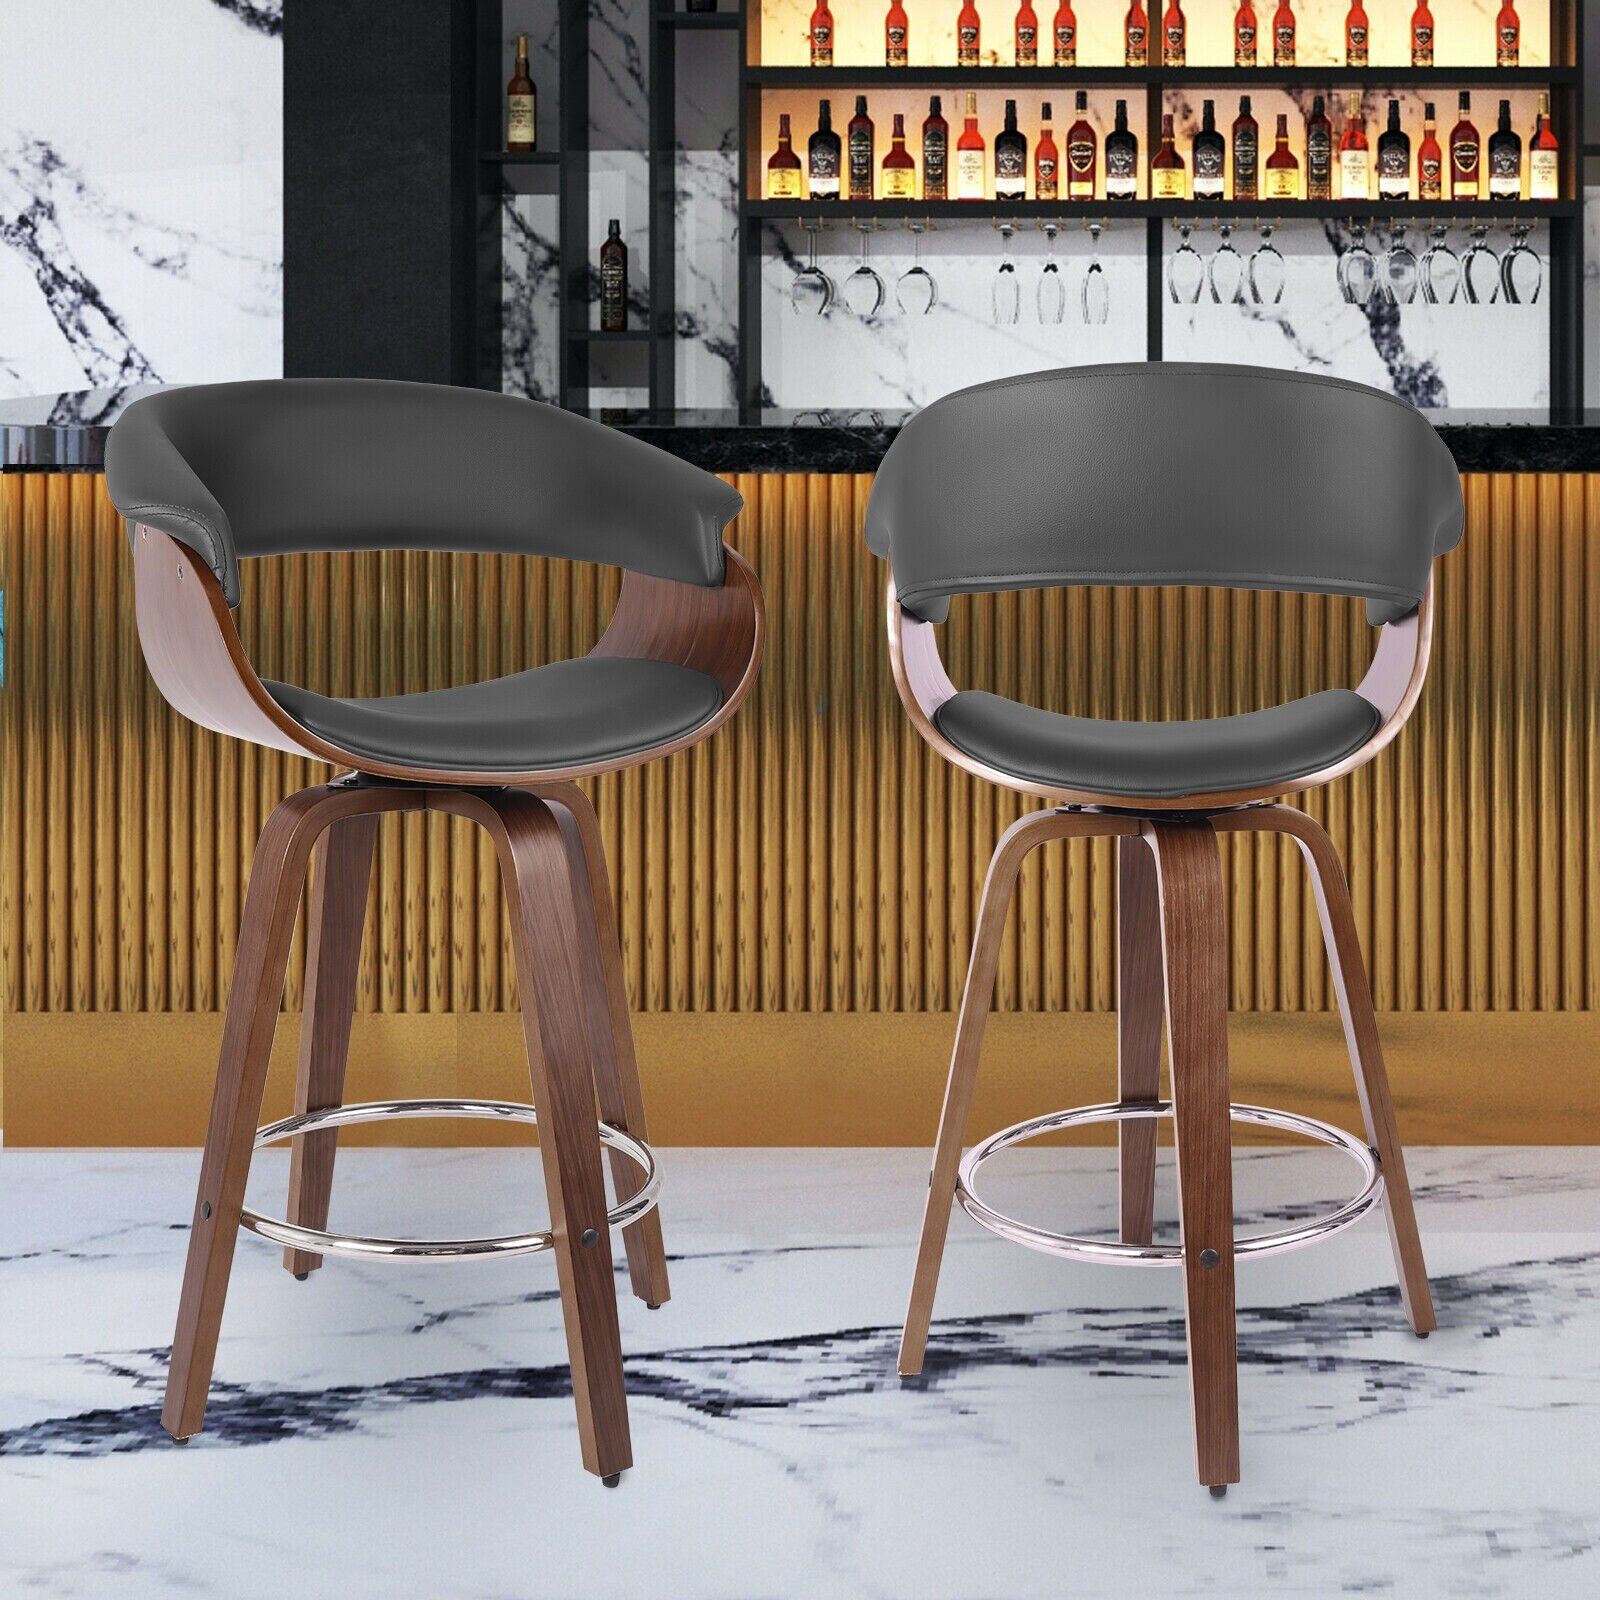 Upgrade Your Seating with Bar Stools Featuring Arms and Swivel Functionality